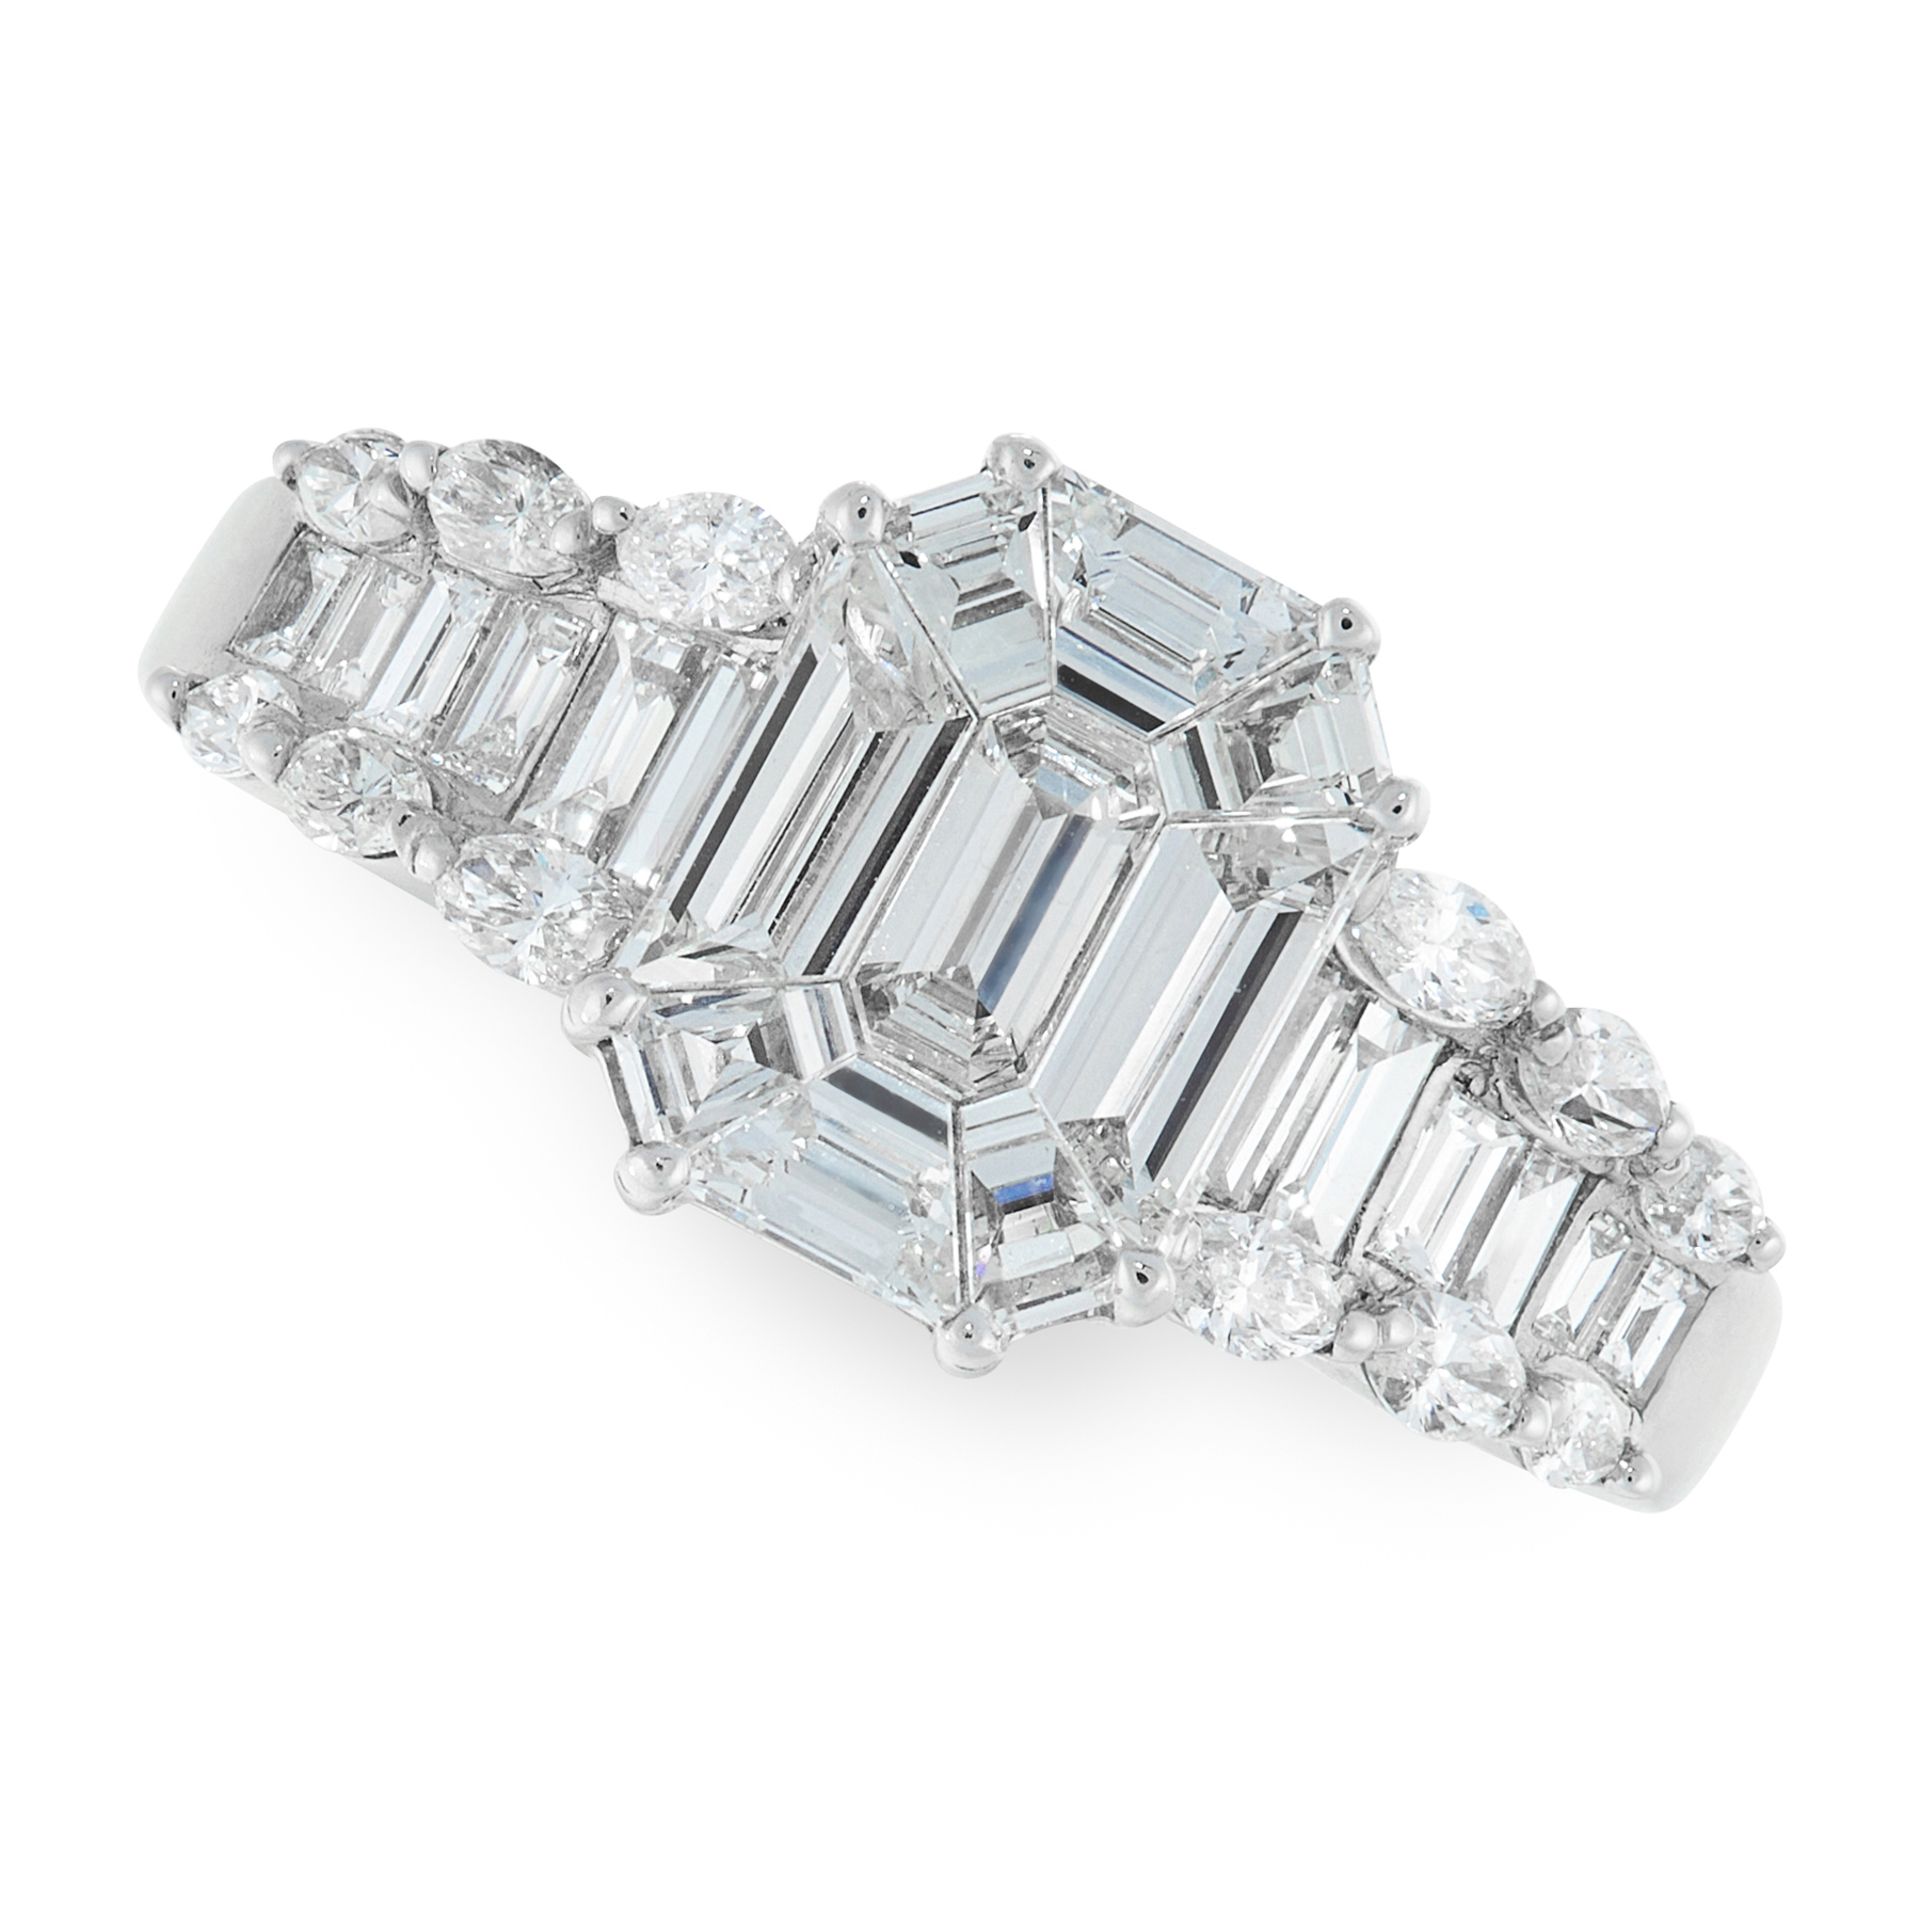 A DIAMOND DRESS RING in 18ct white gold, cluster set with a central emerald cut diamond accented